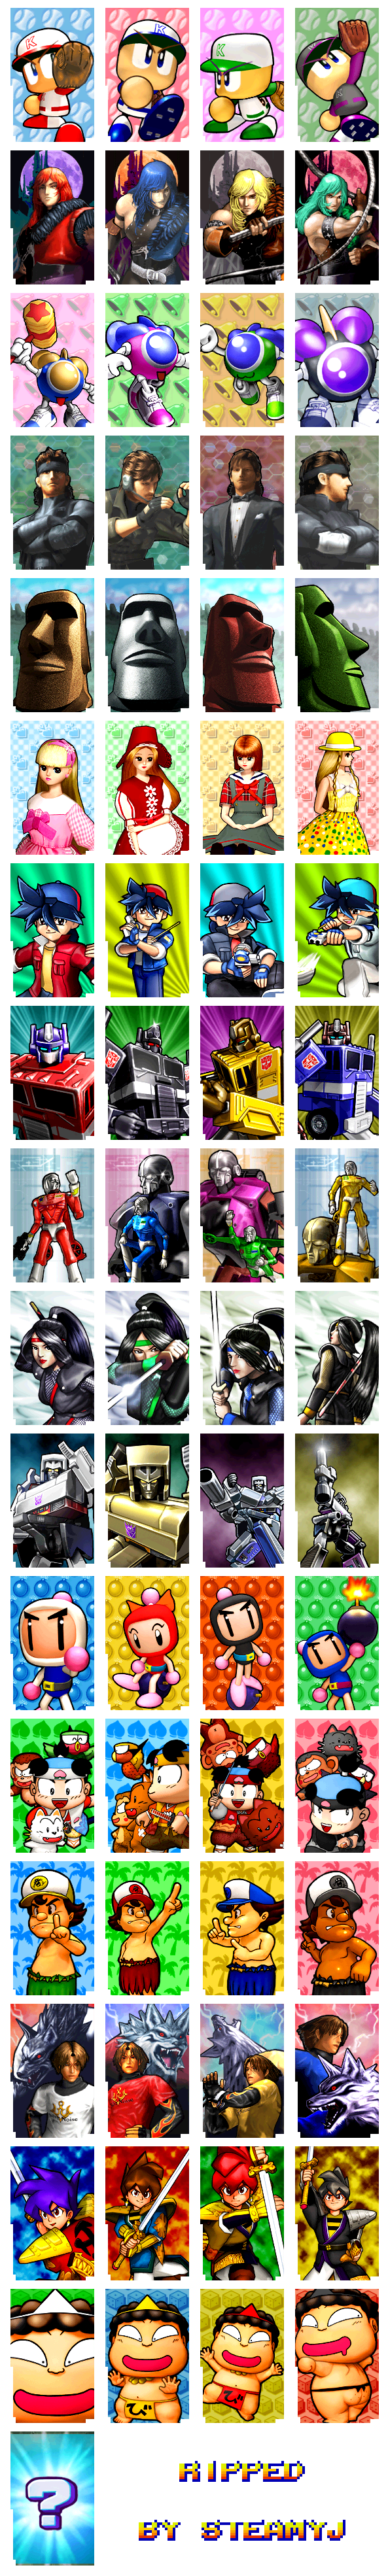 DreamMix TV World Fighters (JPN) - Character Select Portraits